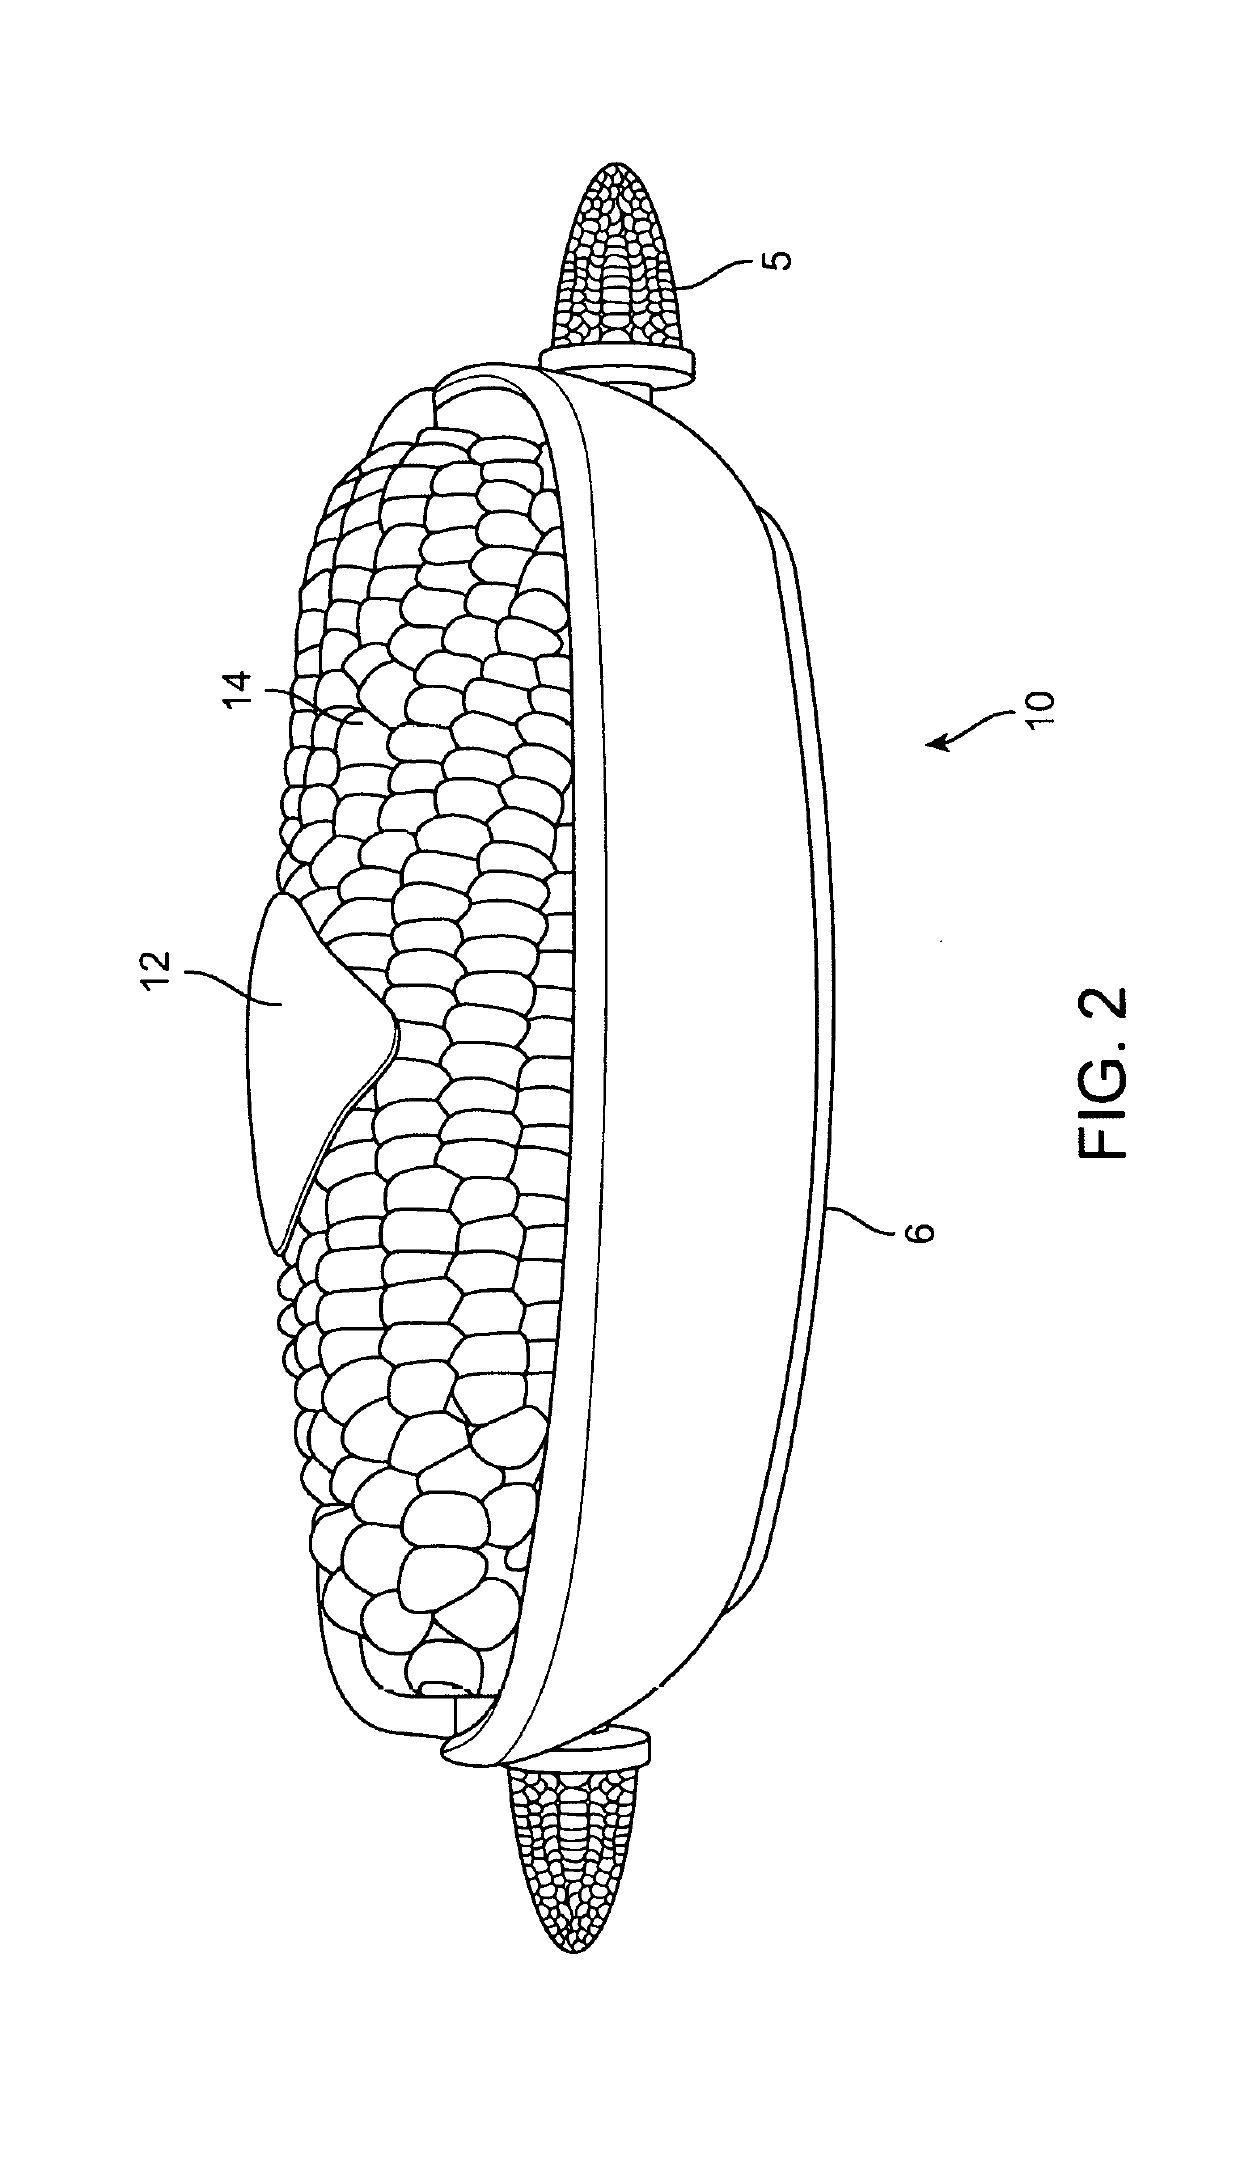 Manual device for maxdimizing application of butter to an ear of corn